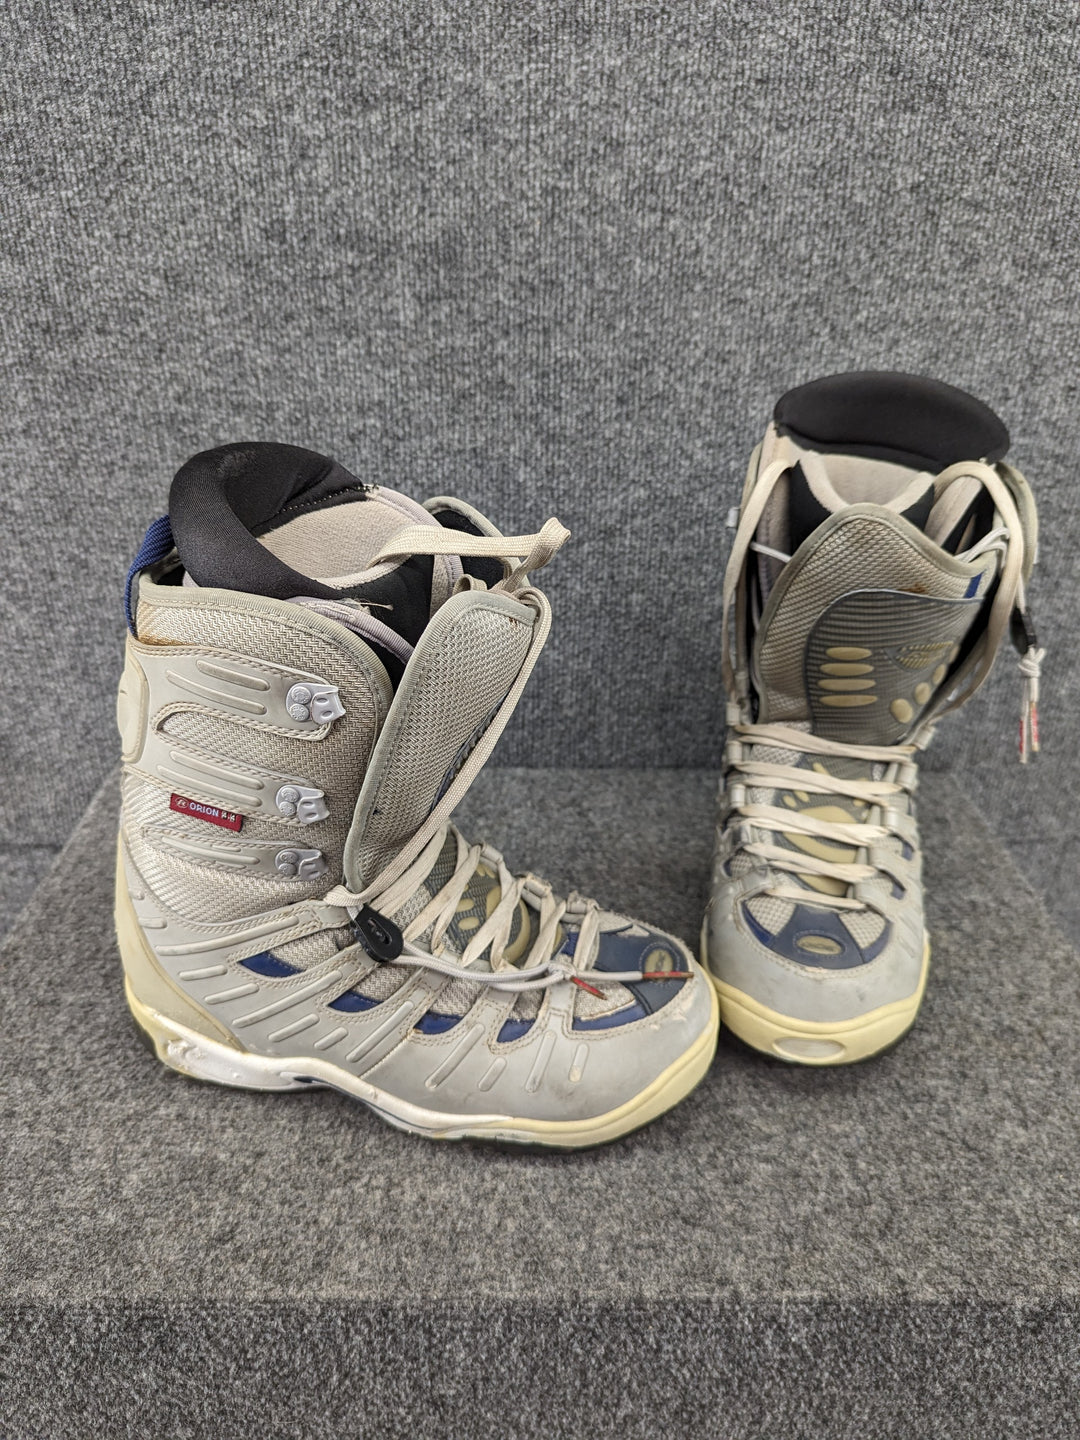 Ride Size 9/42 Snowboard Boots